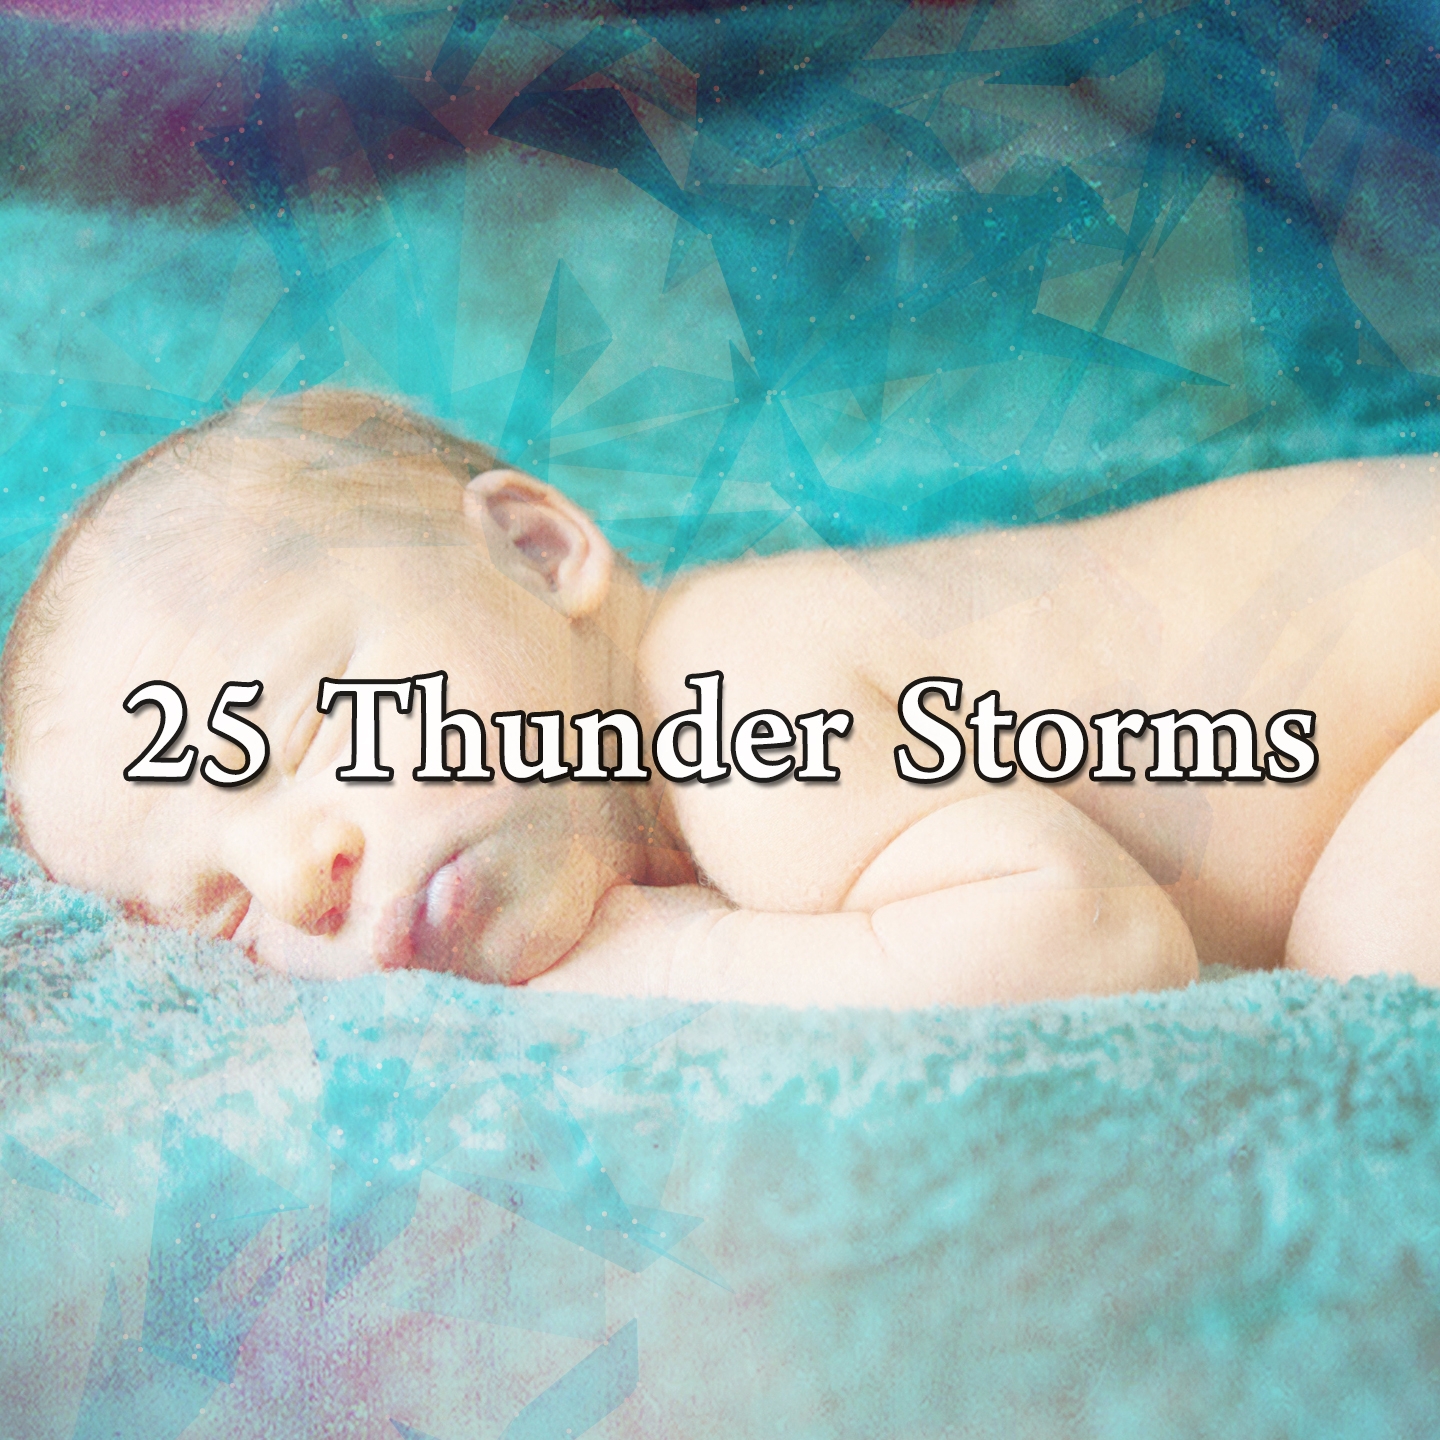 25 Thunder Storms